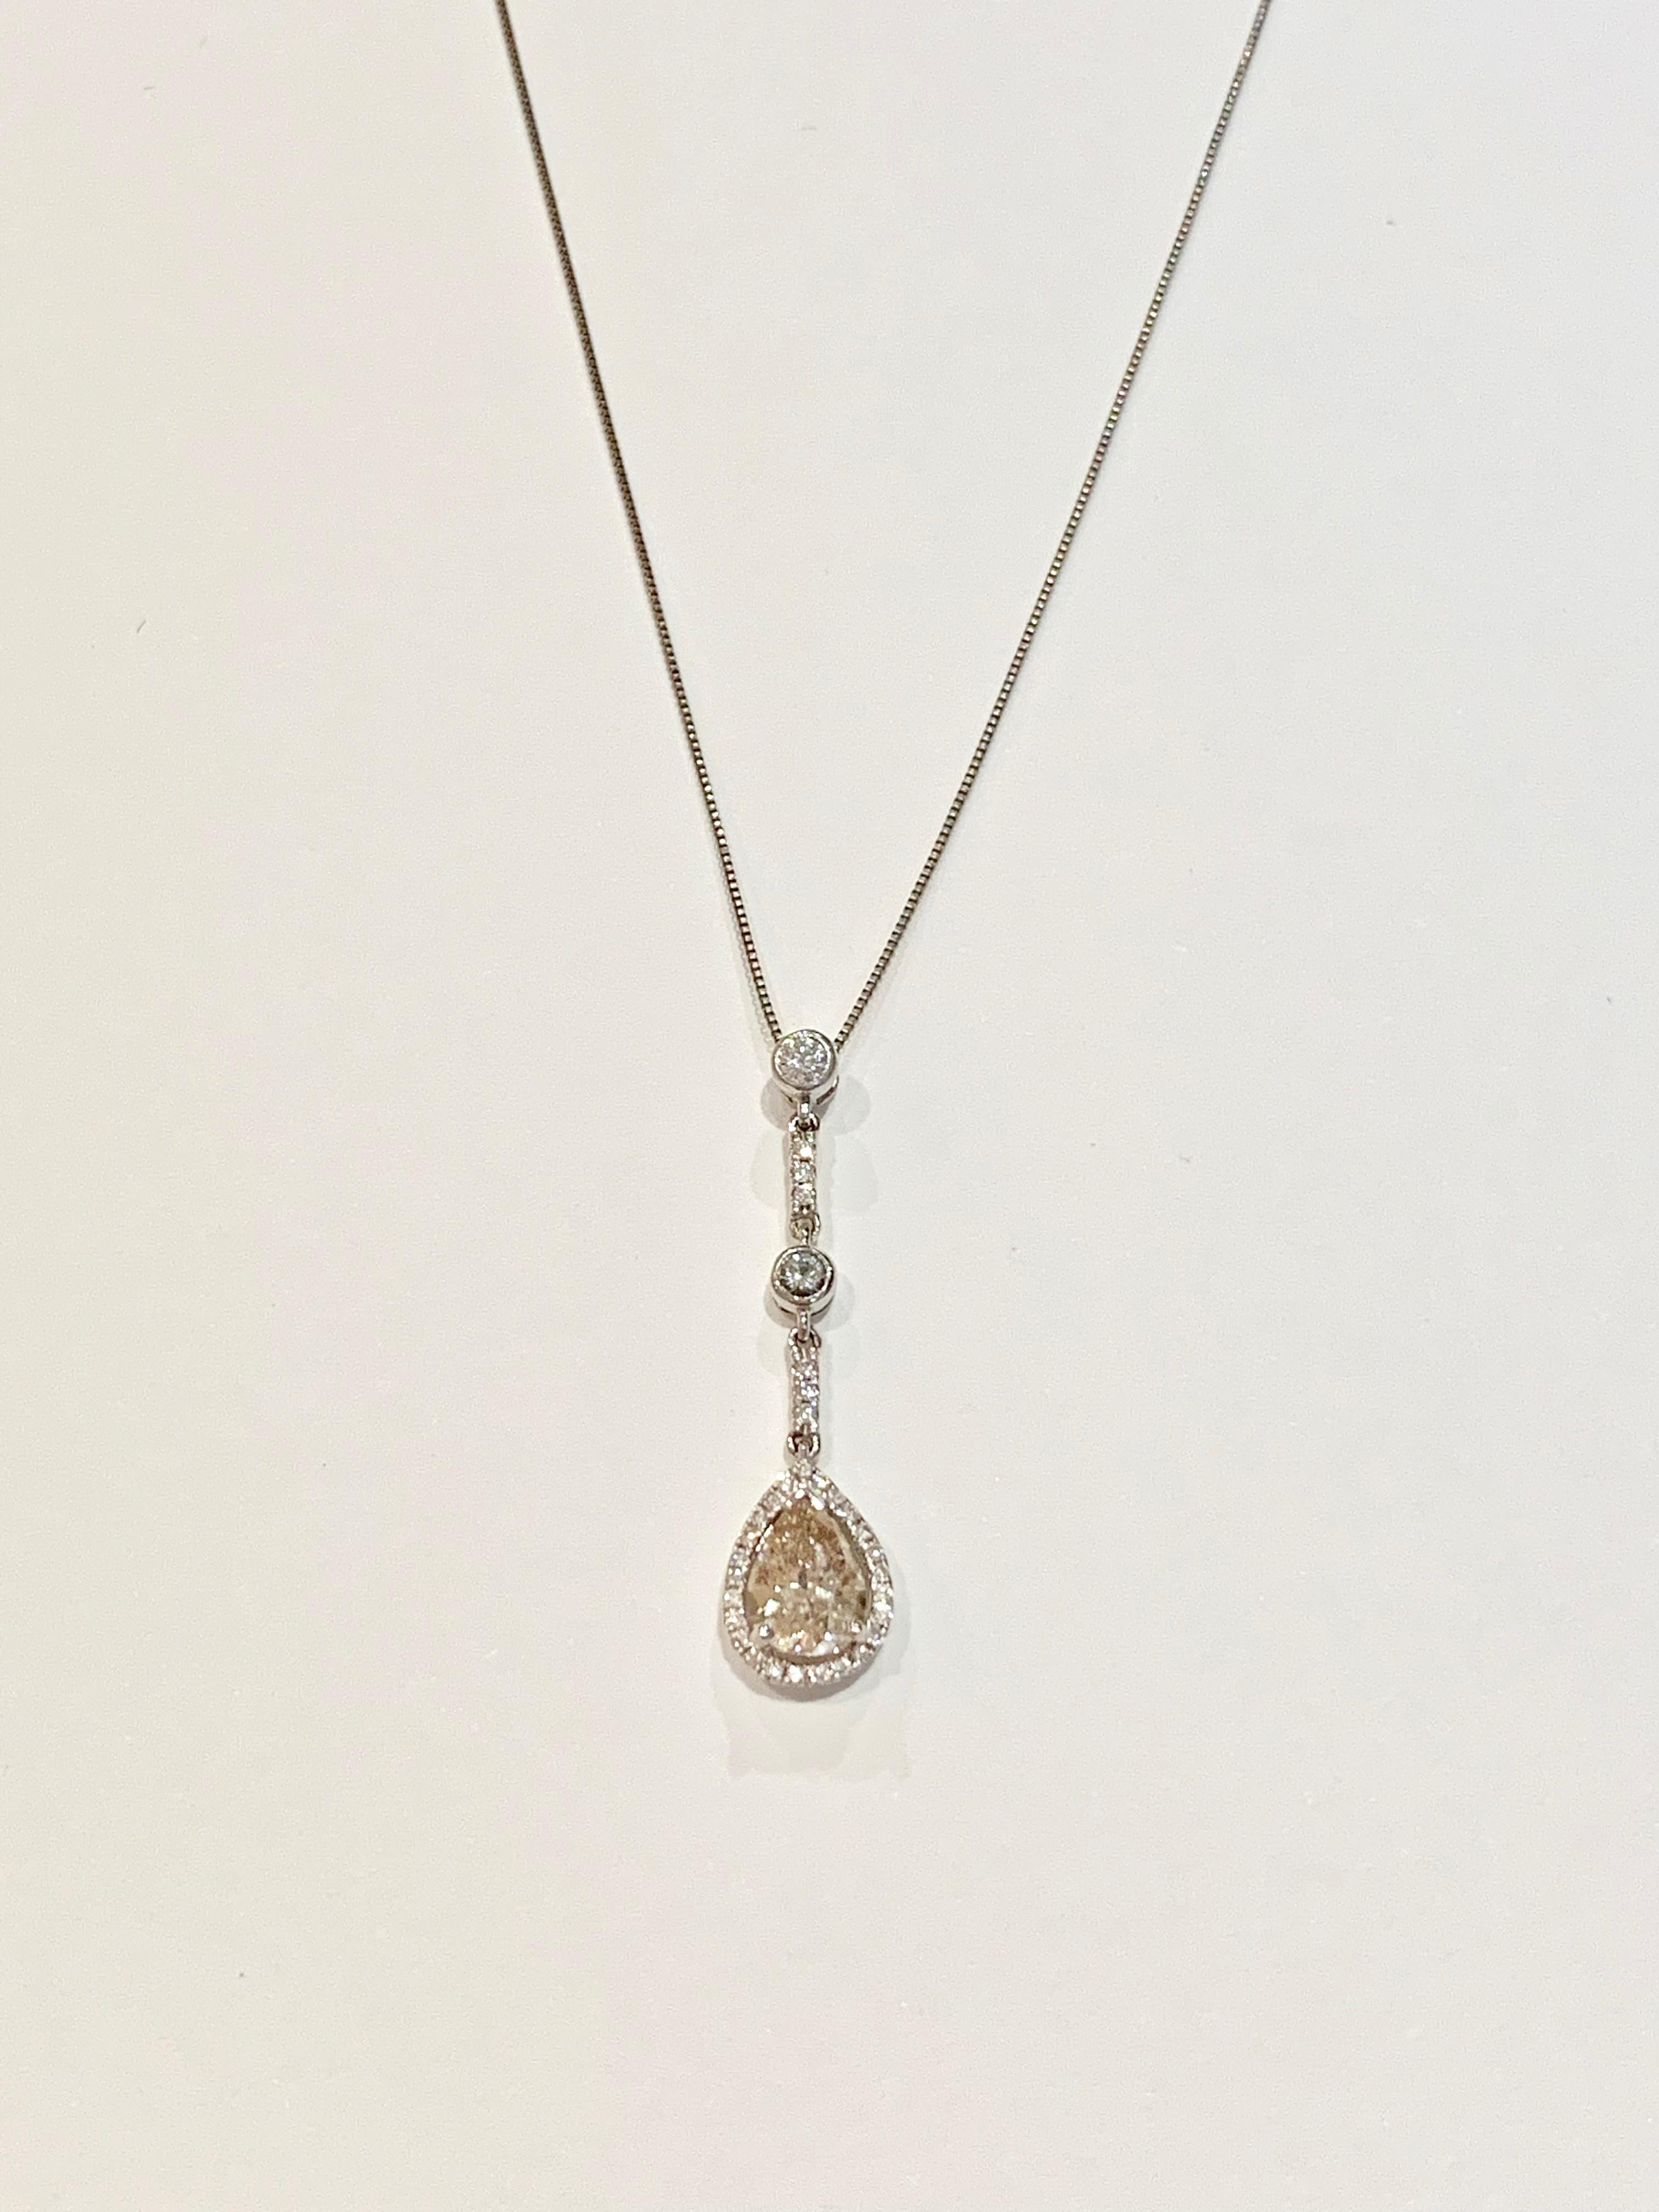 This very elegant drop pendant is made up of a GIA Certified 0.83ct Fancy Yellow/Brown* Pear Cut Diamond set in a diamond halo surround and suspended from a diamond set jointed bale.  The pendant setting contains 0.19ct of round brilliant cut stones